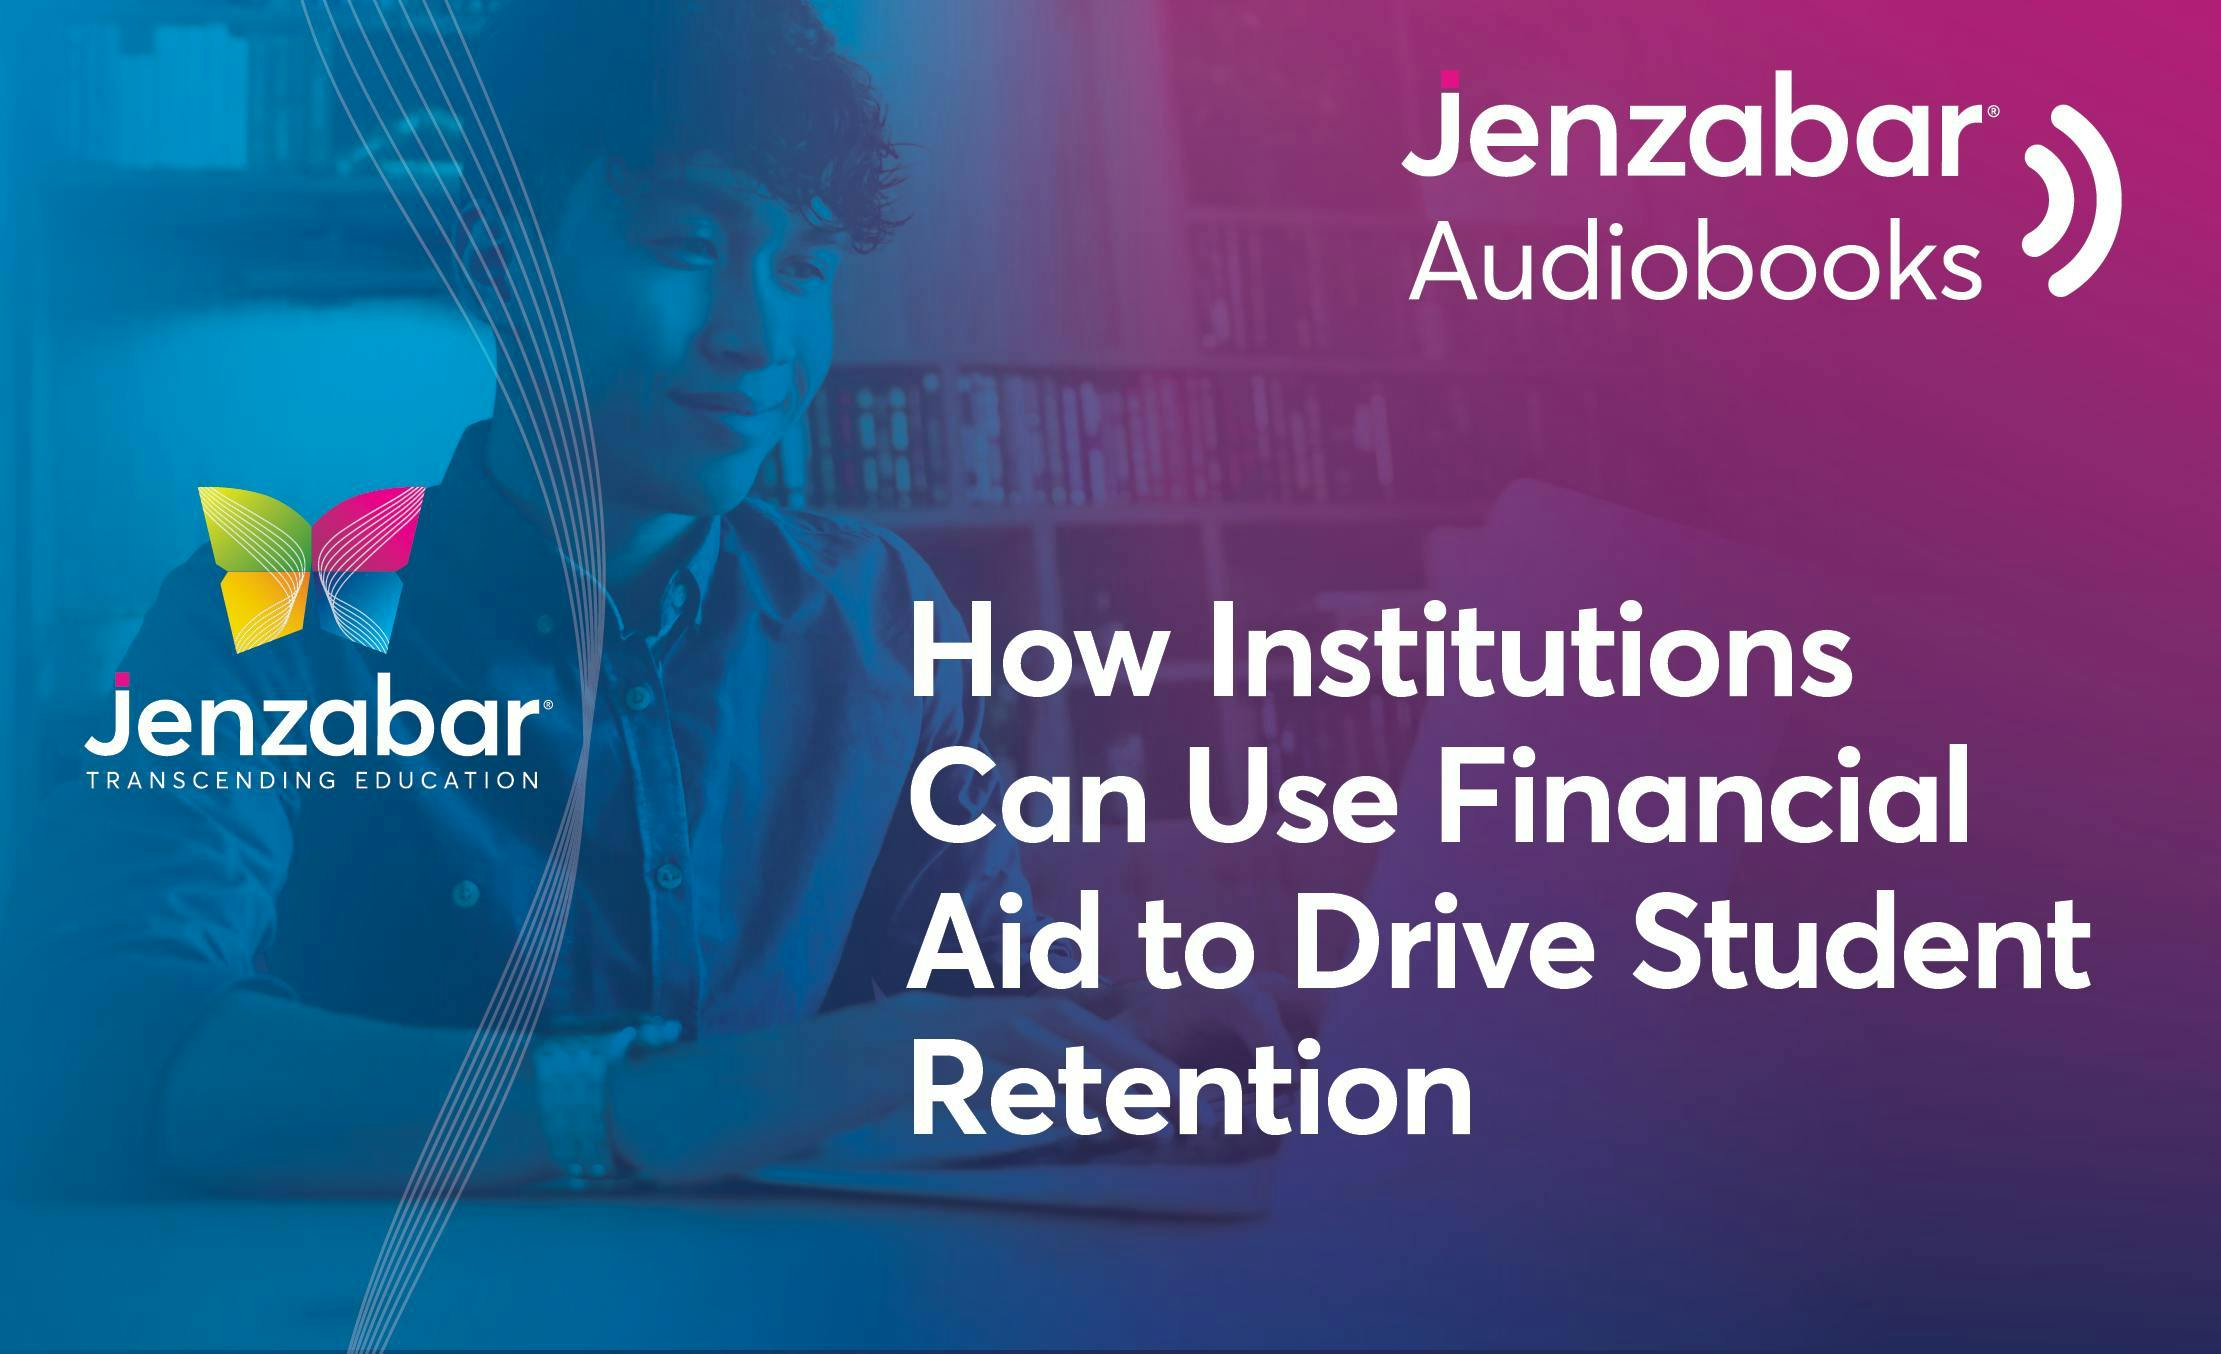 Audiobook: How Institutions Can Use Financial Aid to Drive Student Retention